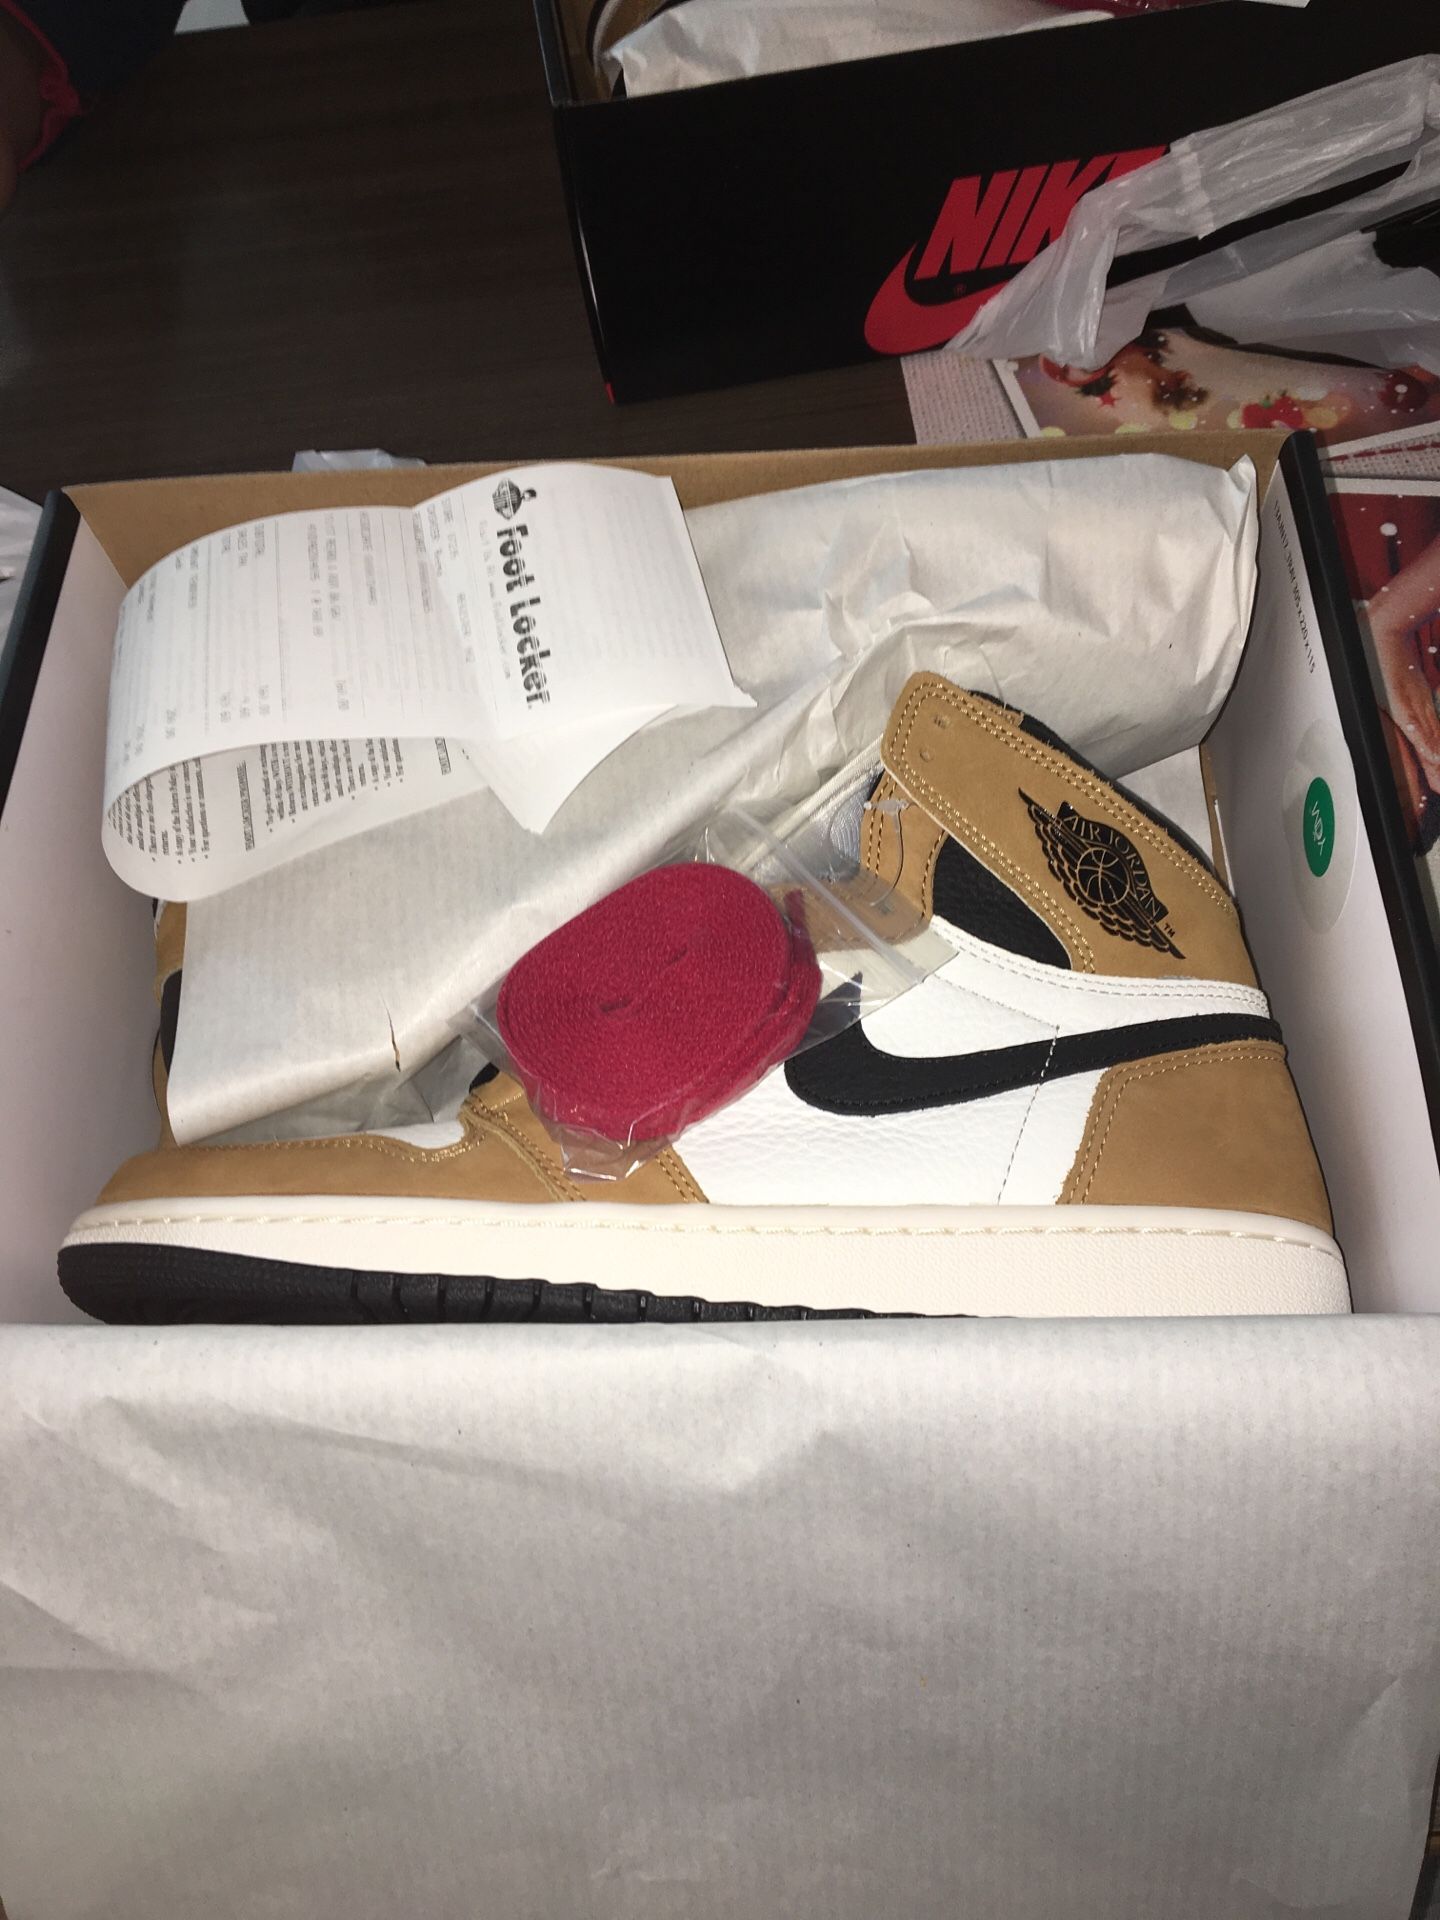 Brand new Jordan 1 “rookie of the year”